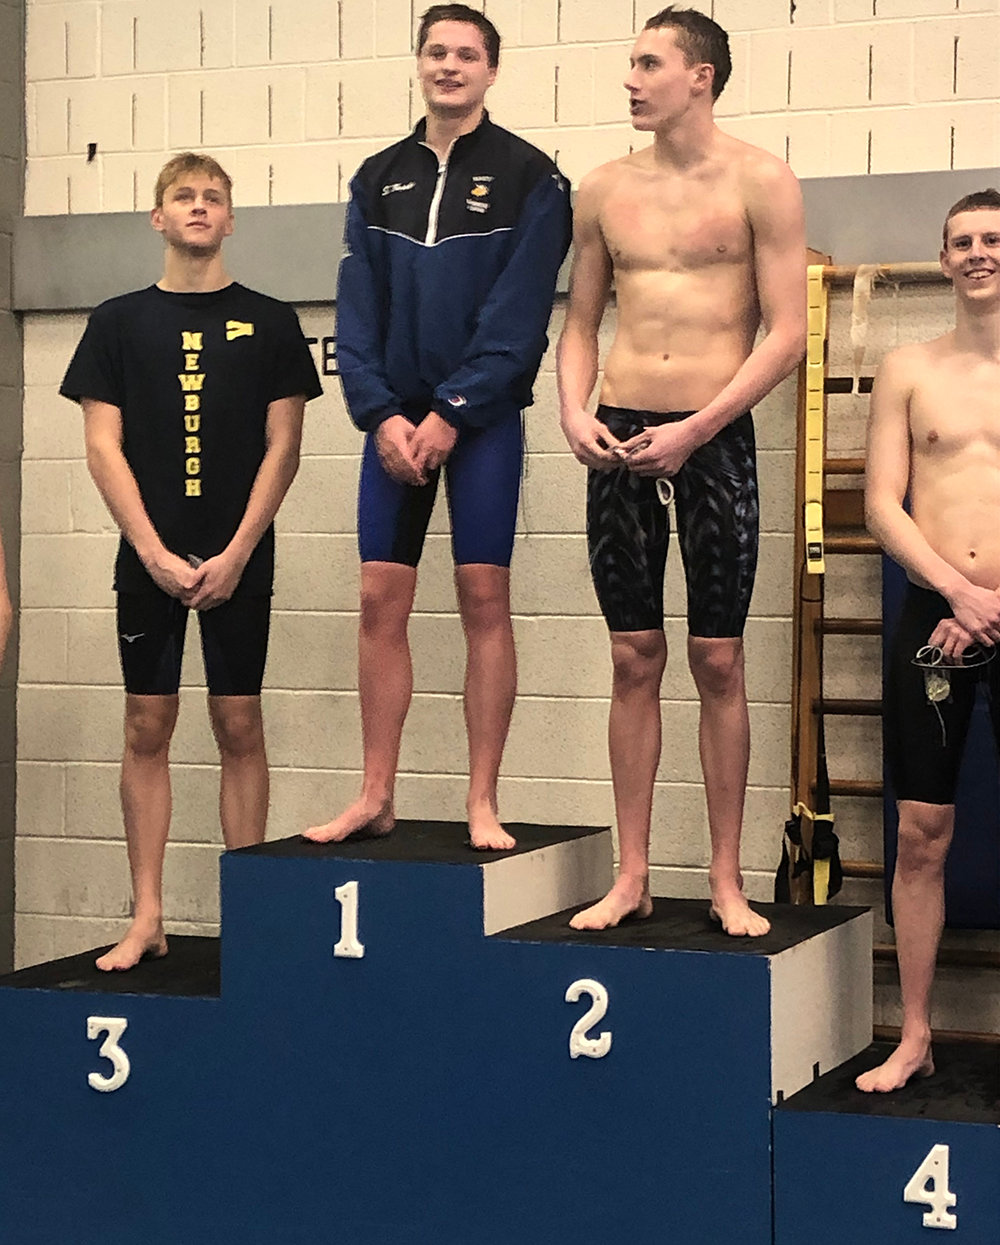 Valley Central’s Sean Zupko stands on the podium after winning the 500-yard freestyle at the Section 9 championship meet at Valley Central High School.